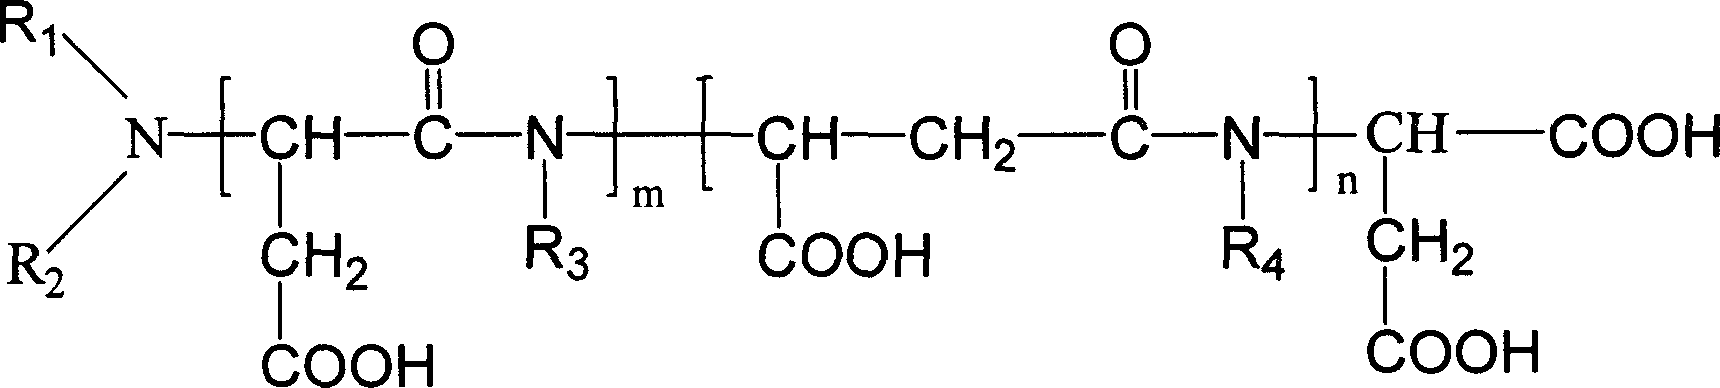 Asparagic acid possessing phosphinic group, its preparation method and uses in water processing